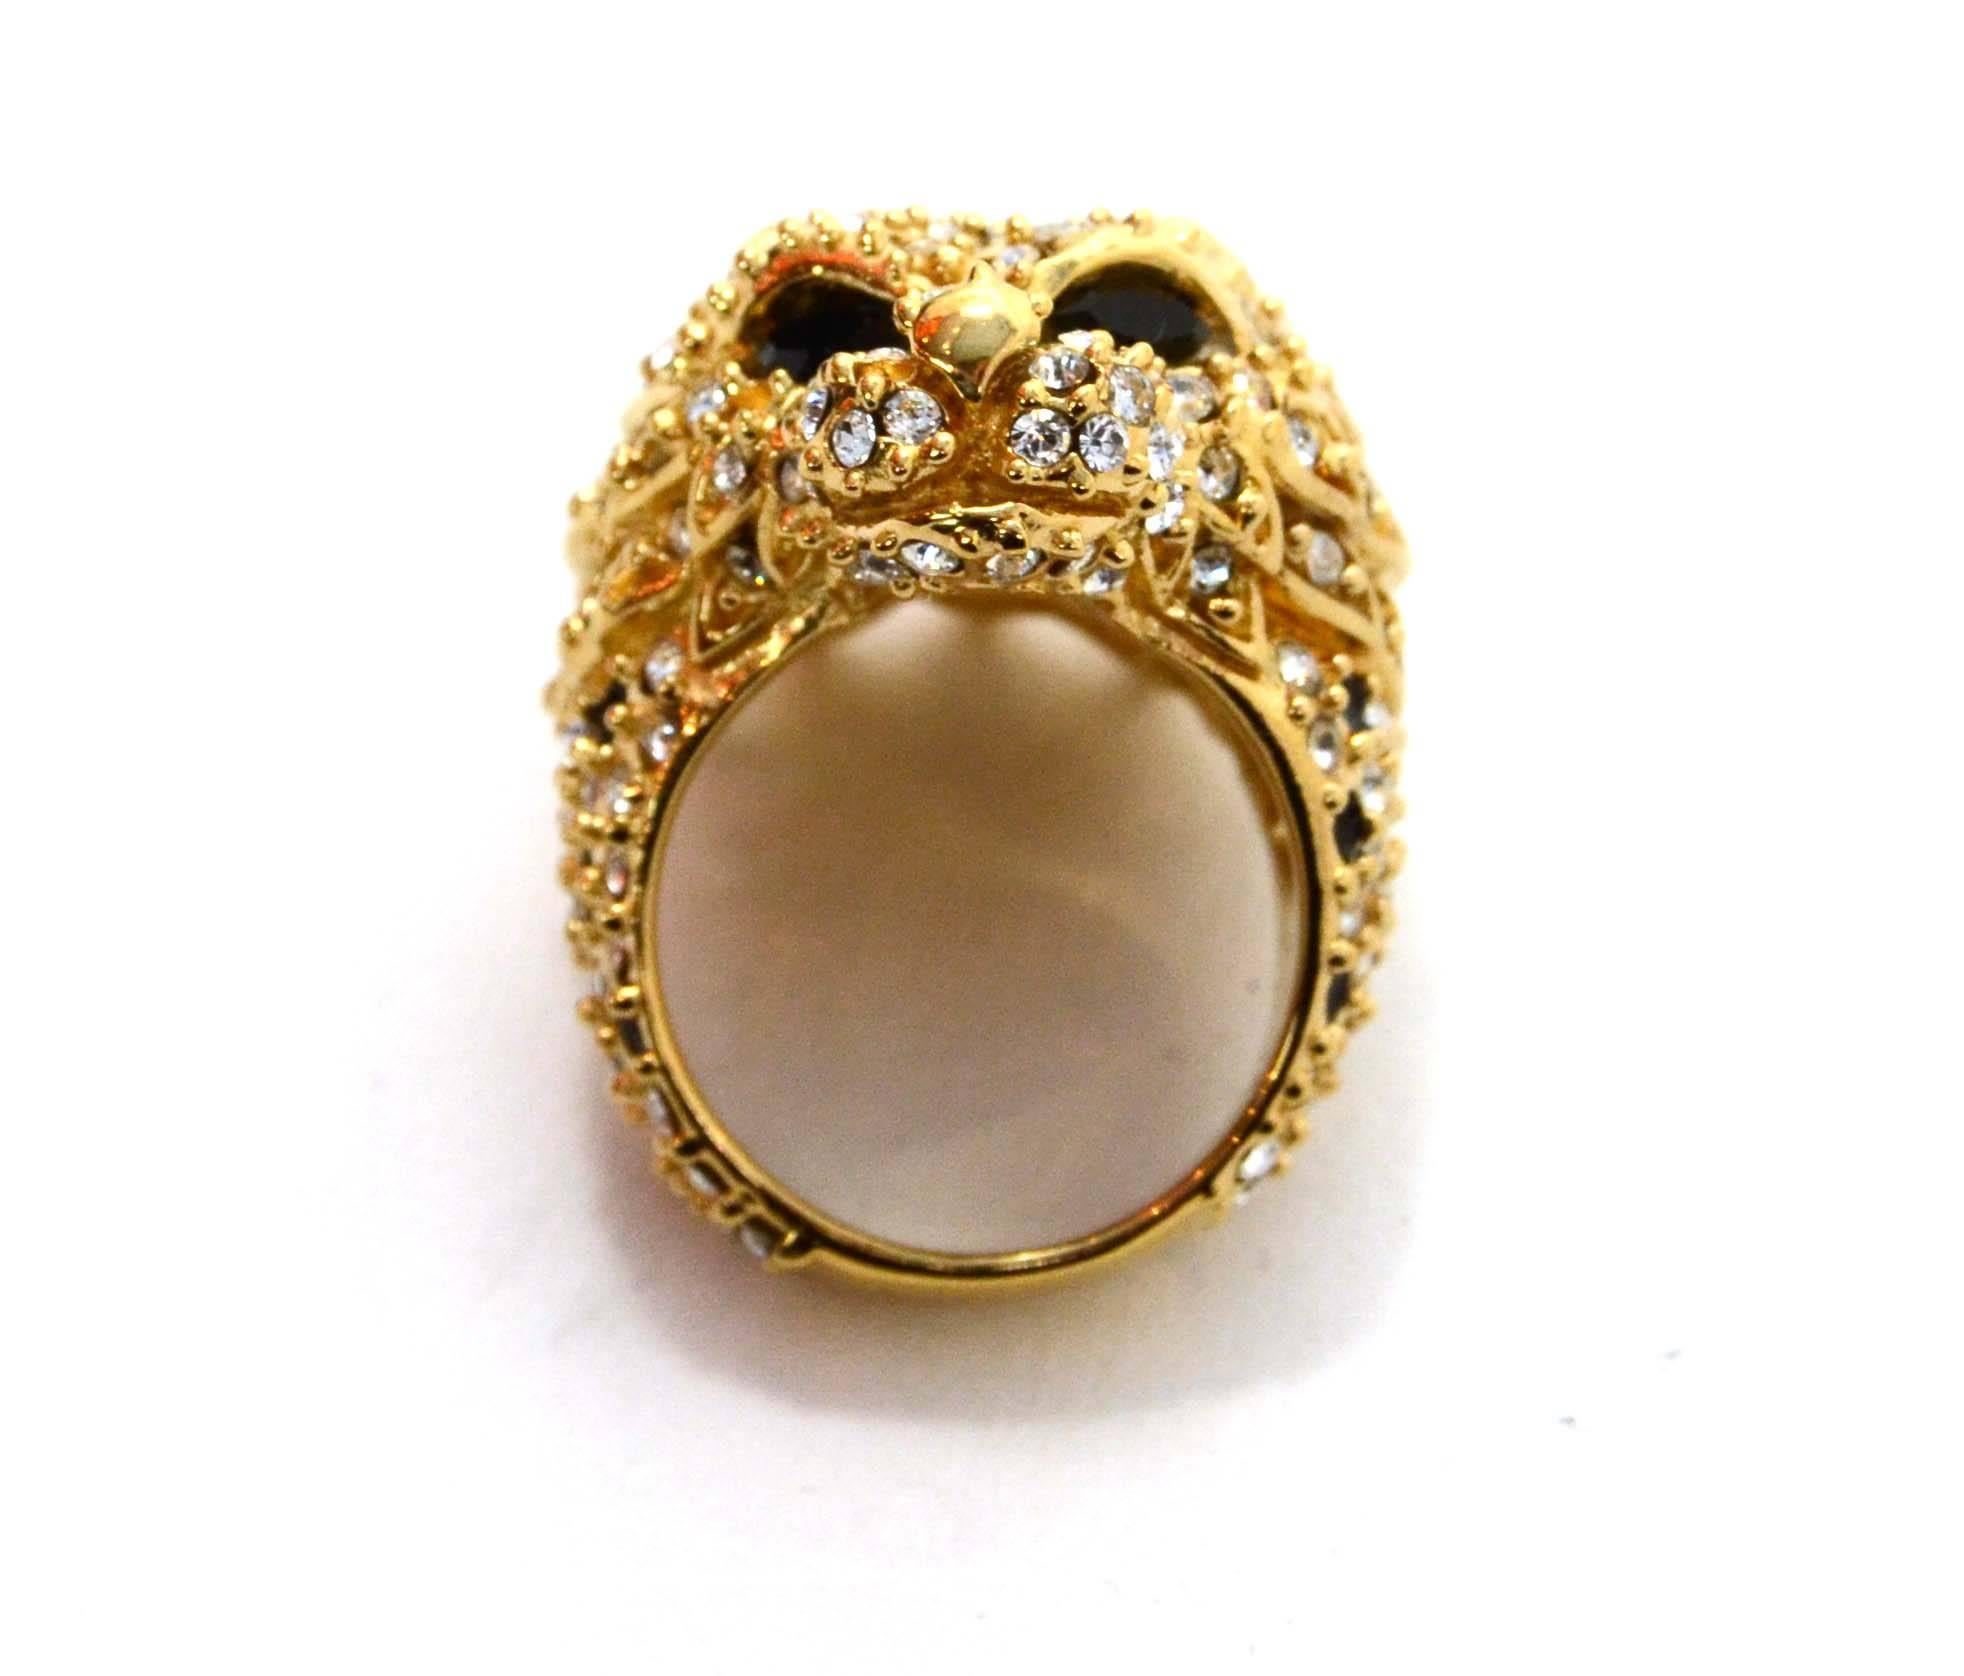 Saint Laurent Goldtone Crystal Lion Ring

    Made In: France

    Color: Gold, blacl

    Materials: Metal, crystal

    Stamp: SAINT LAURENT PARIS

    Retail Price: $795 + tax

    Overall Condition: Excellent pre owned condition

 